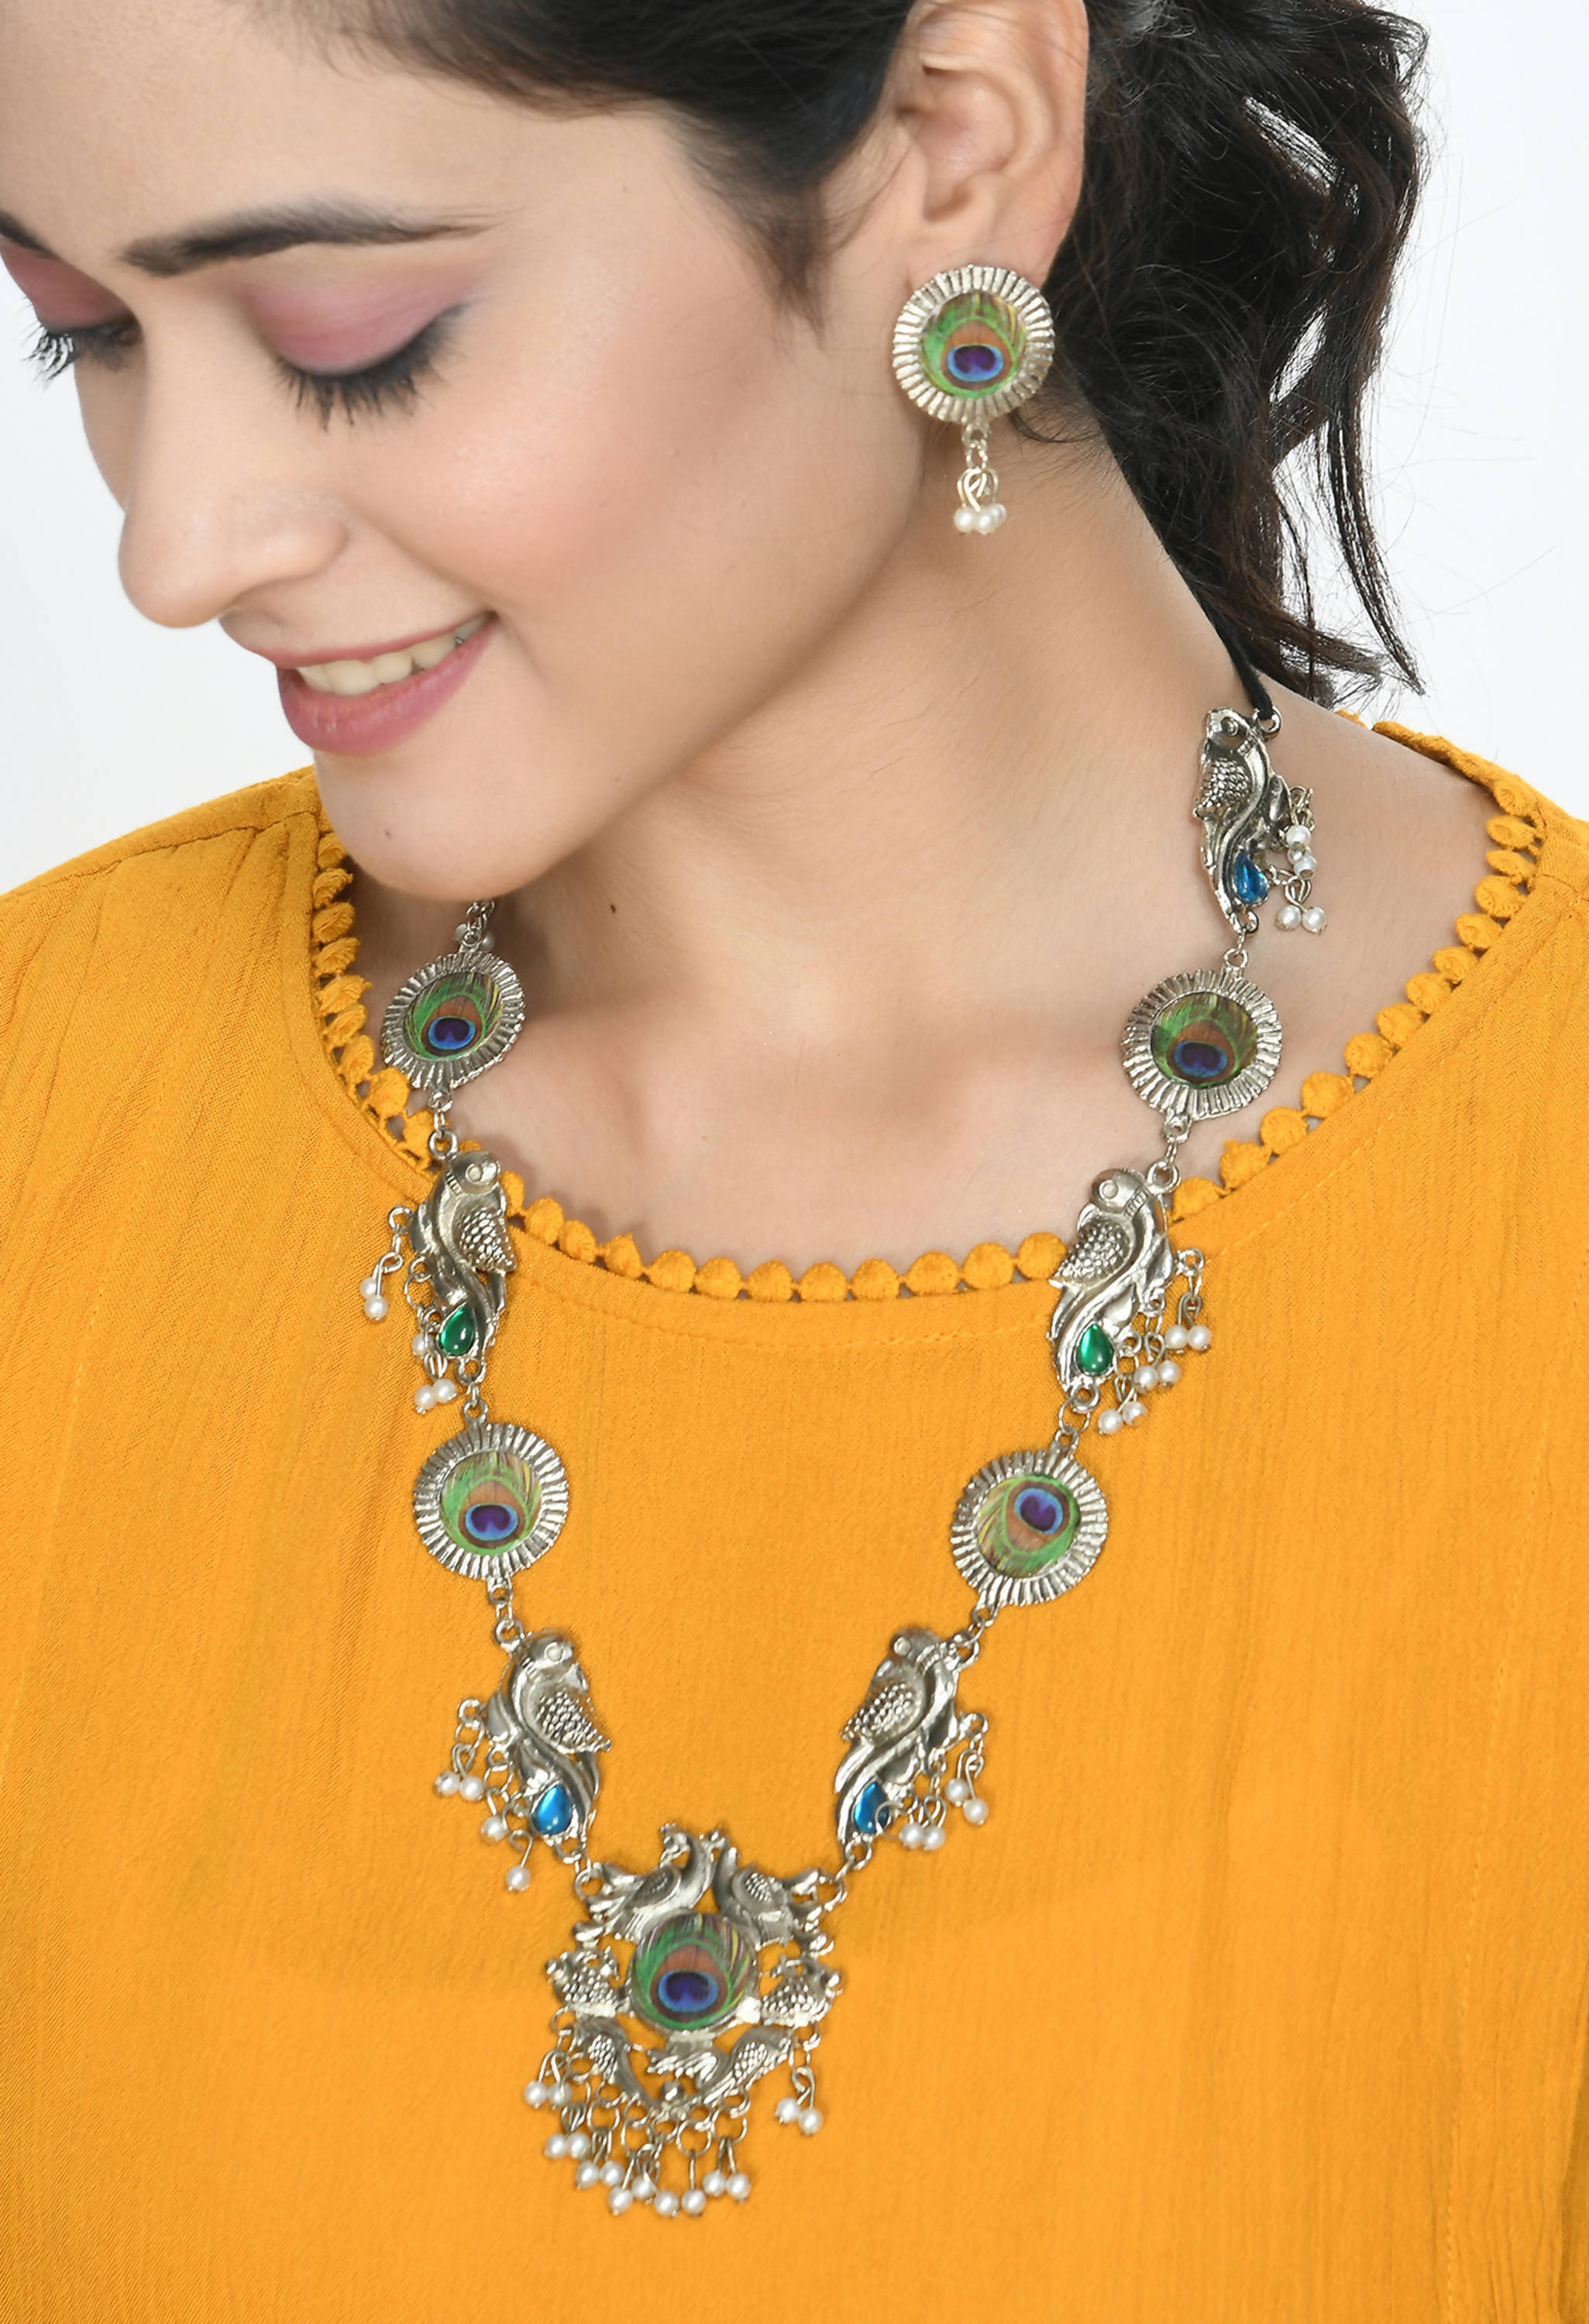 Trendia Treditional Peacock Design Necklace Jkms_058